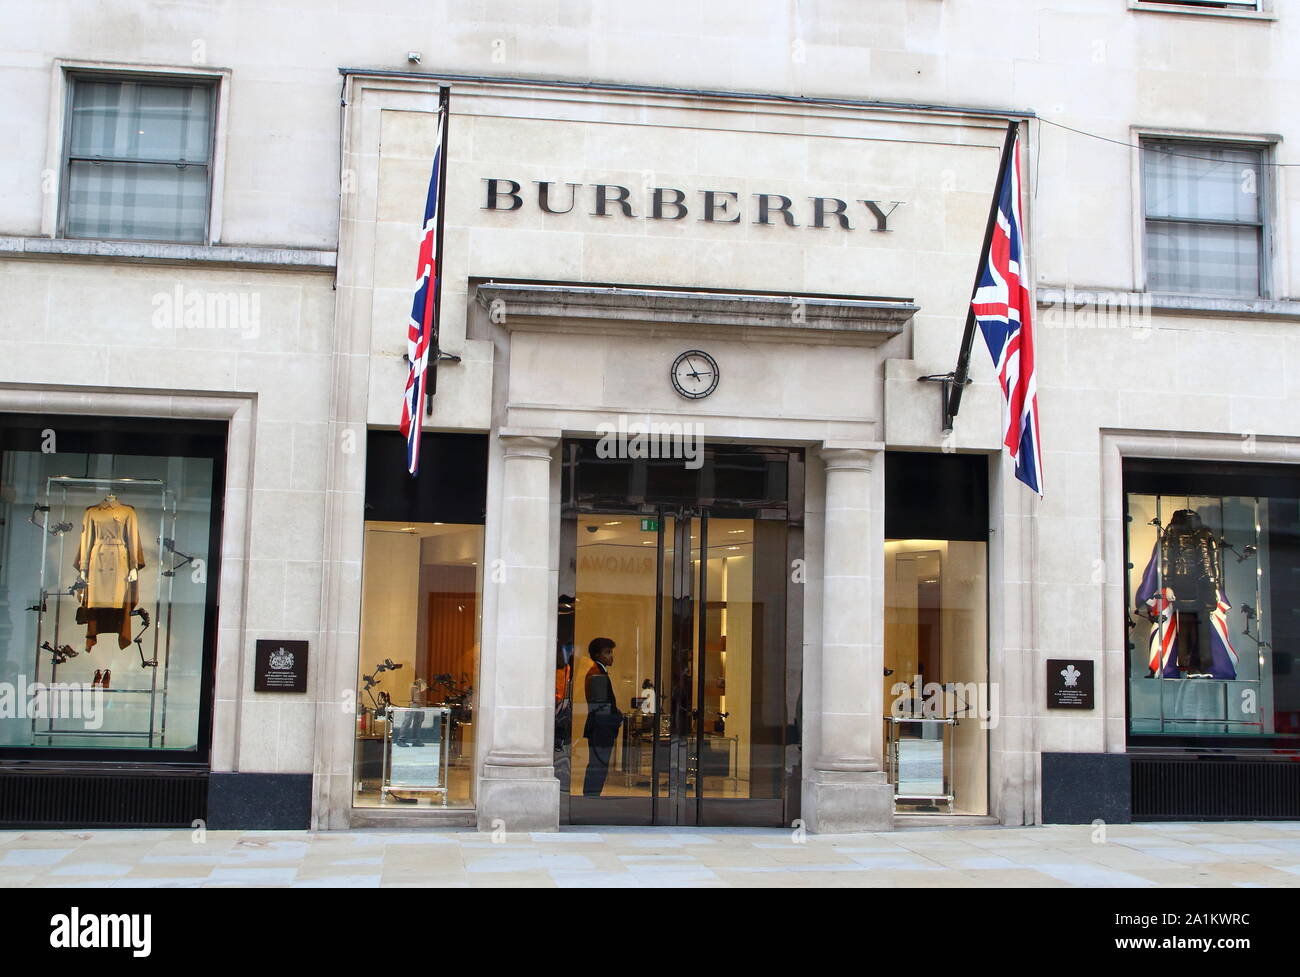 burberry outlet london united kingdom>